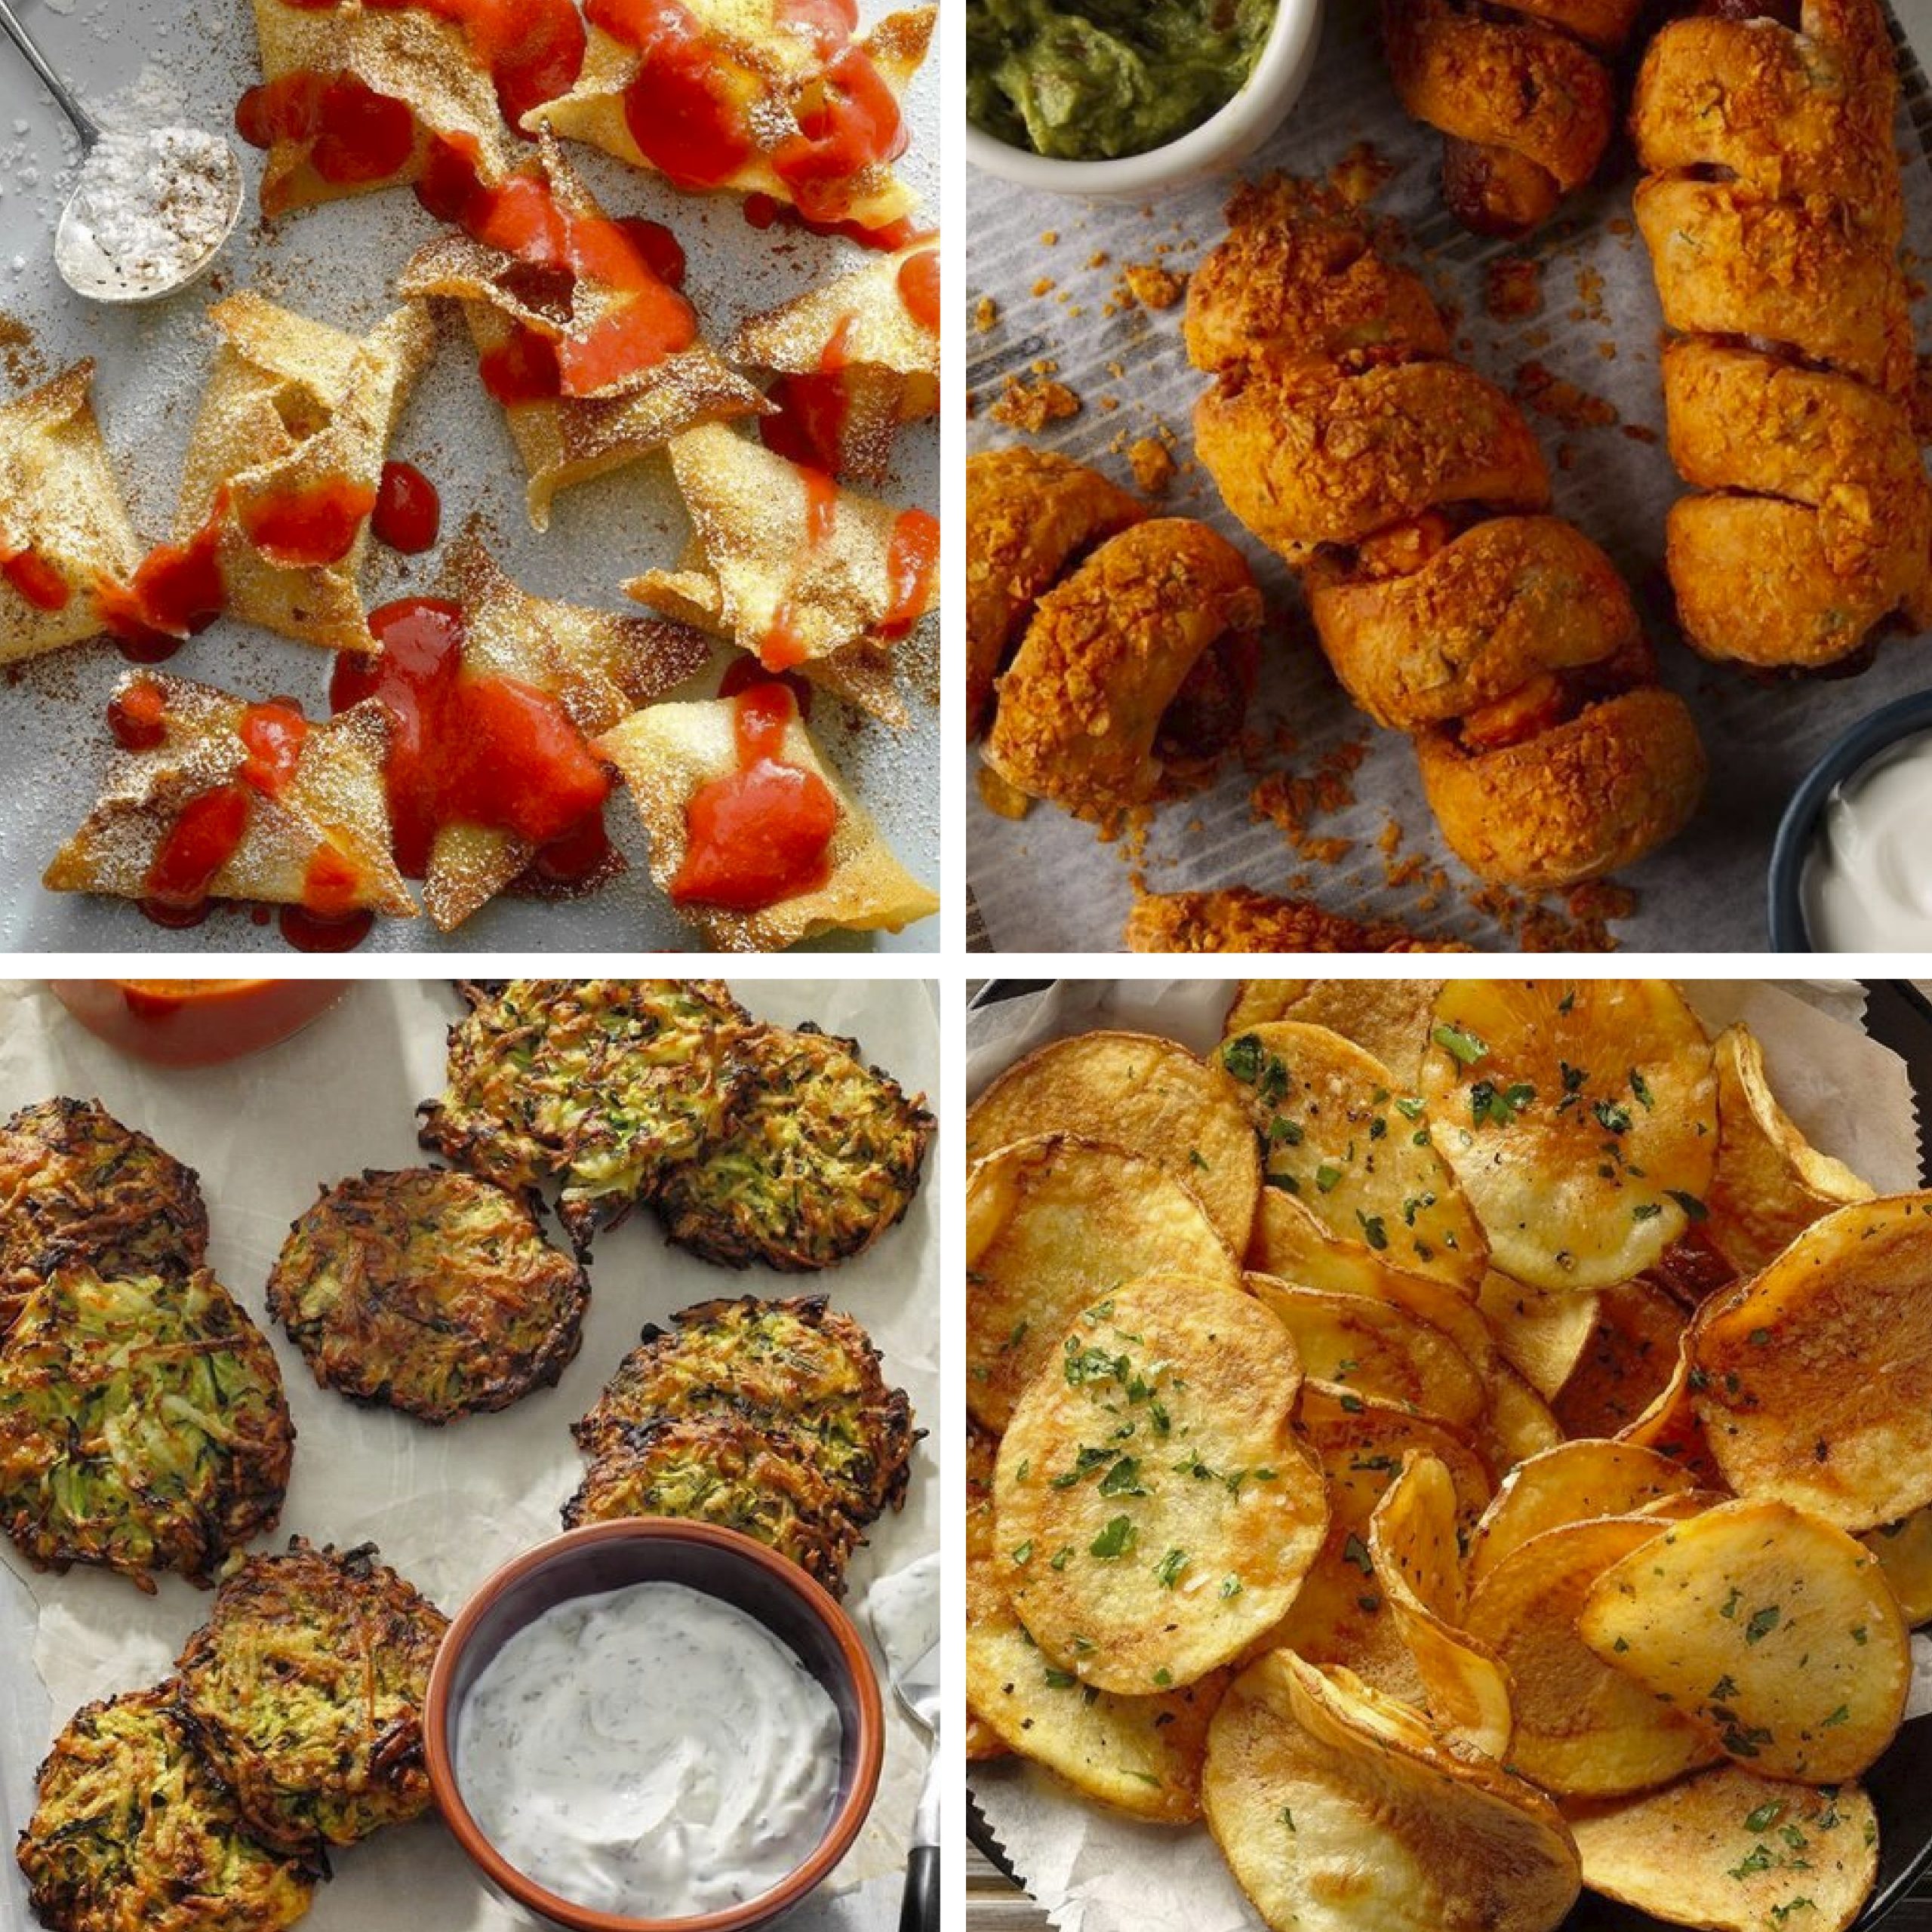 Opheldering Scepticisme Ritmisch 14 Air-Fryer Super Bowl Snacks | Quick and Healthy Appetizers